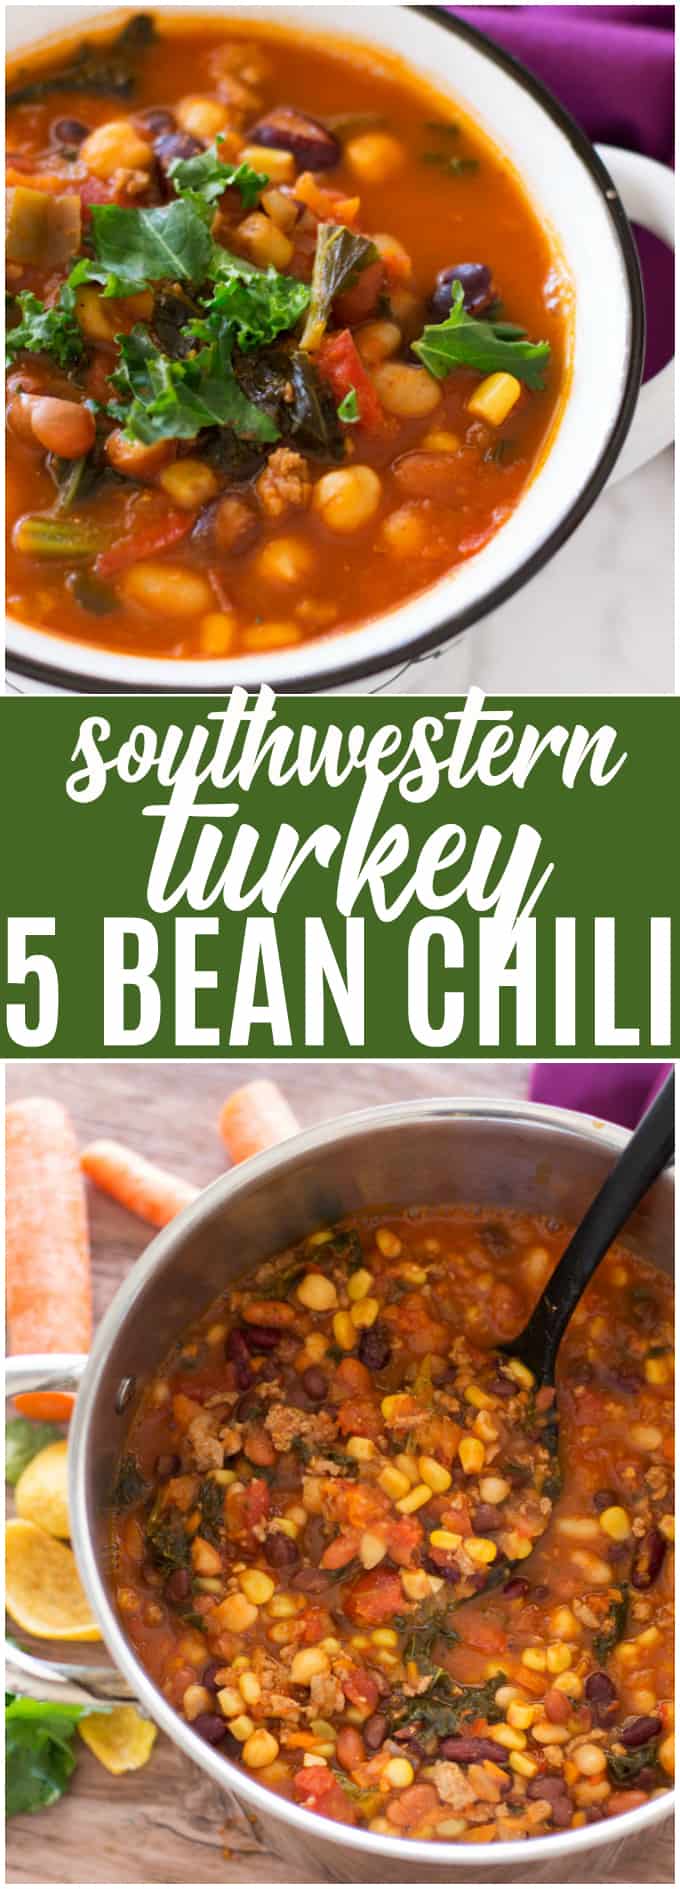 Southwestern Turkey 5 Bean Chili - This chili recipe has EVERYTHING in it! It's packed with 5 kinds of beans, ground turkey, tomatoes, corn, kale, and an amazing chili spice blend. Yum!